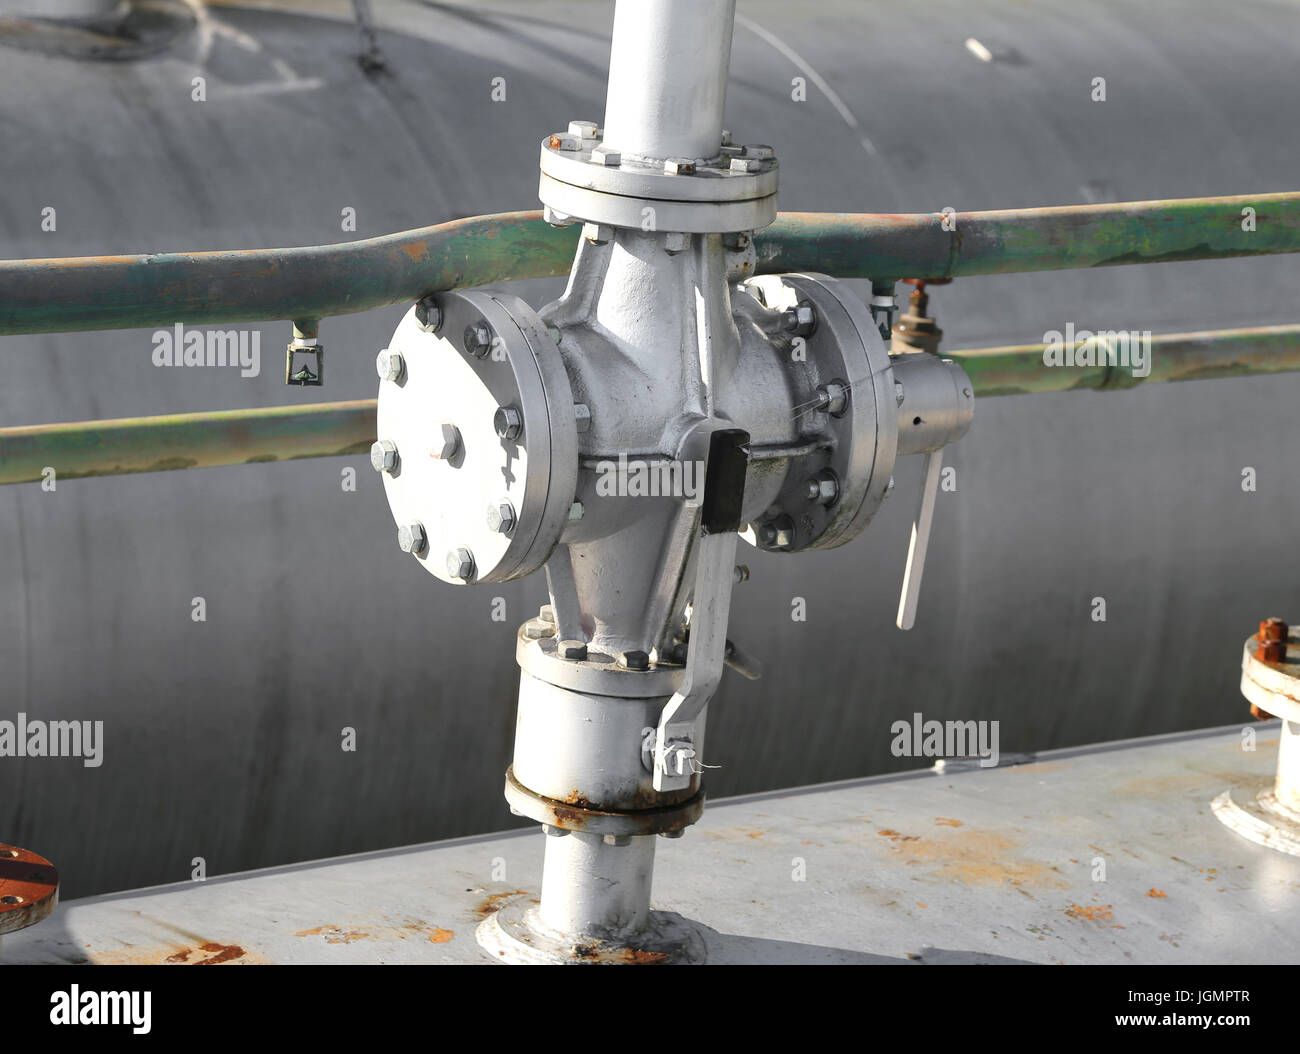 Big shut-off valve above the large fuel tank in the storage area of the industrial plant Stock Photo